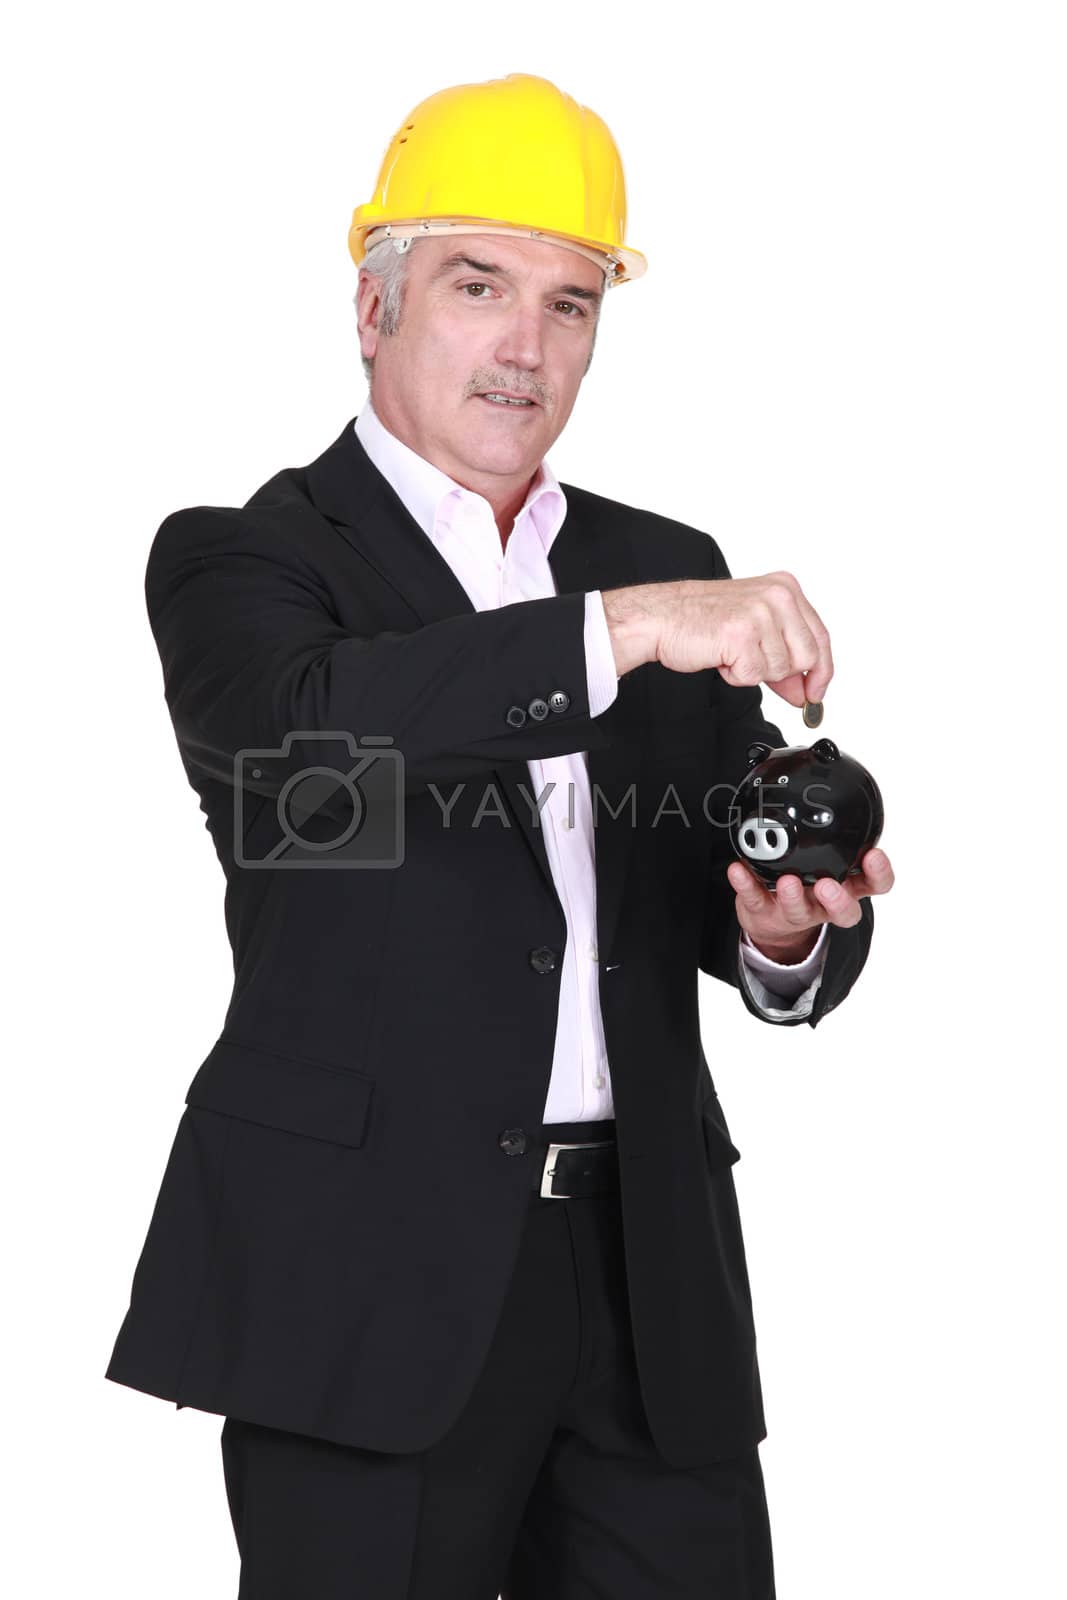 Royalty free image of Engineer putting his savings into a piggy bank by phovoir